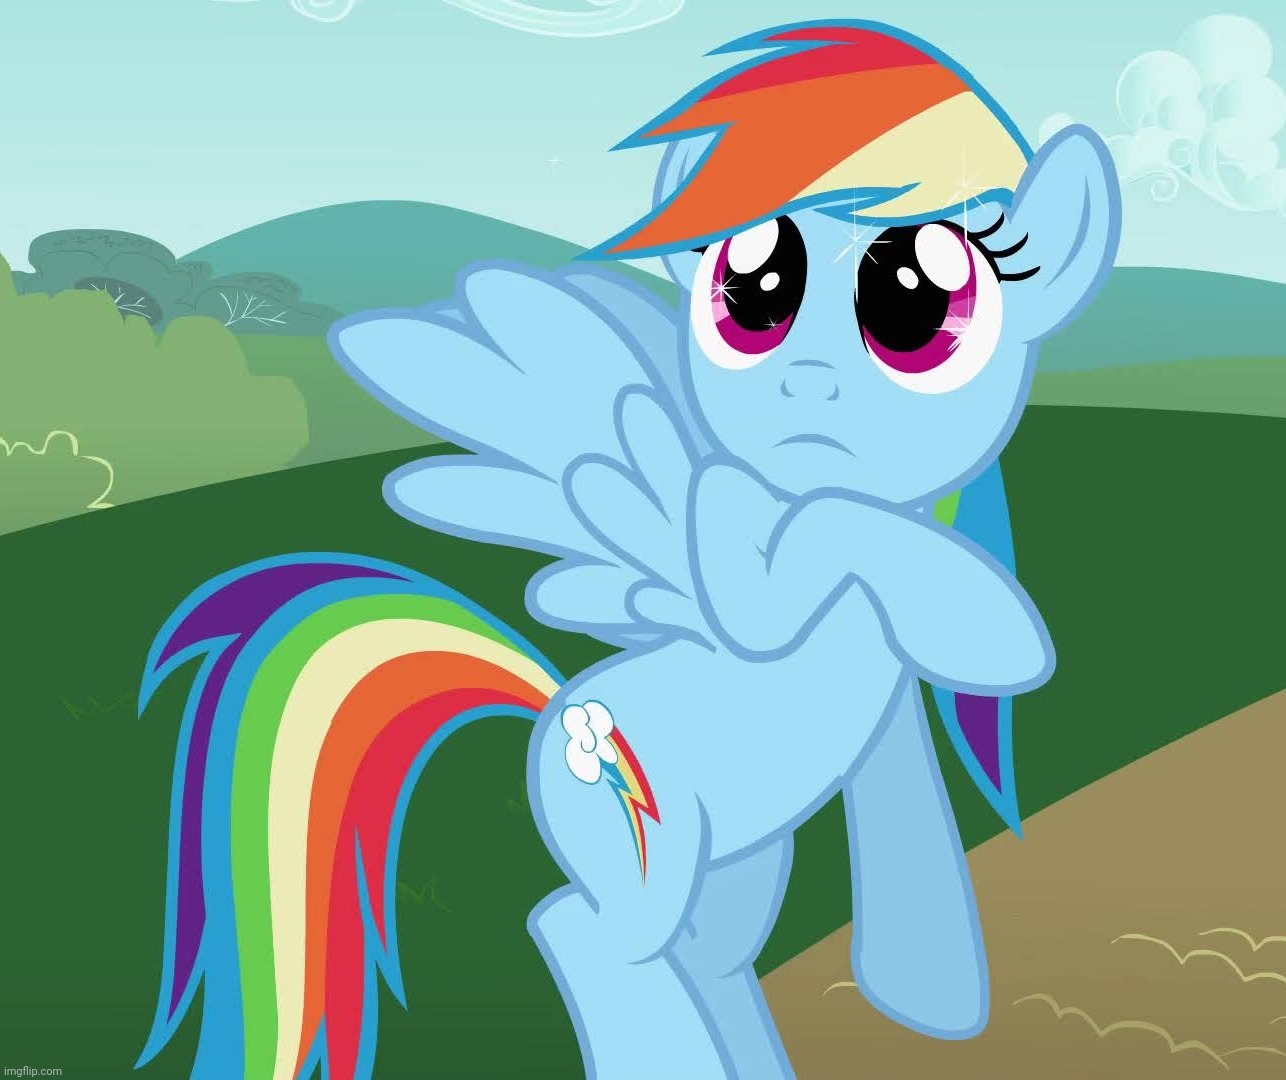 Fangirl Rainbow Dash (MLP) | image tagged in fangirl rainbow dash mlp | made w/ Imgflip meme maker